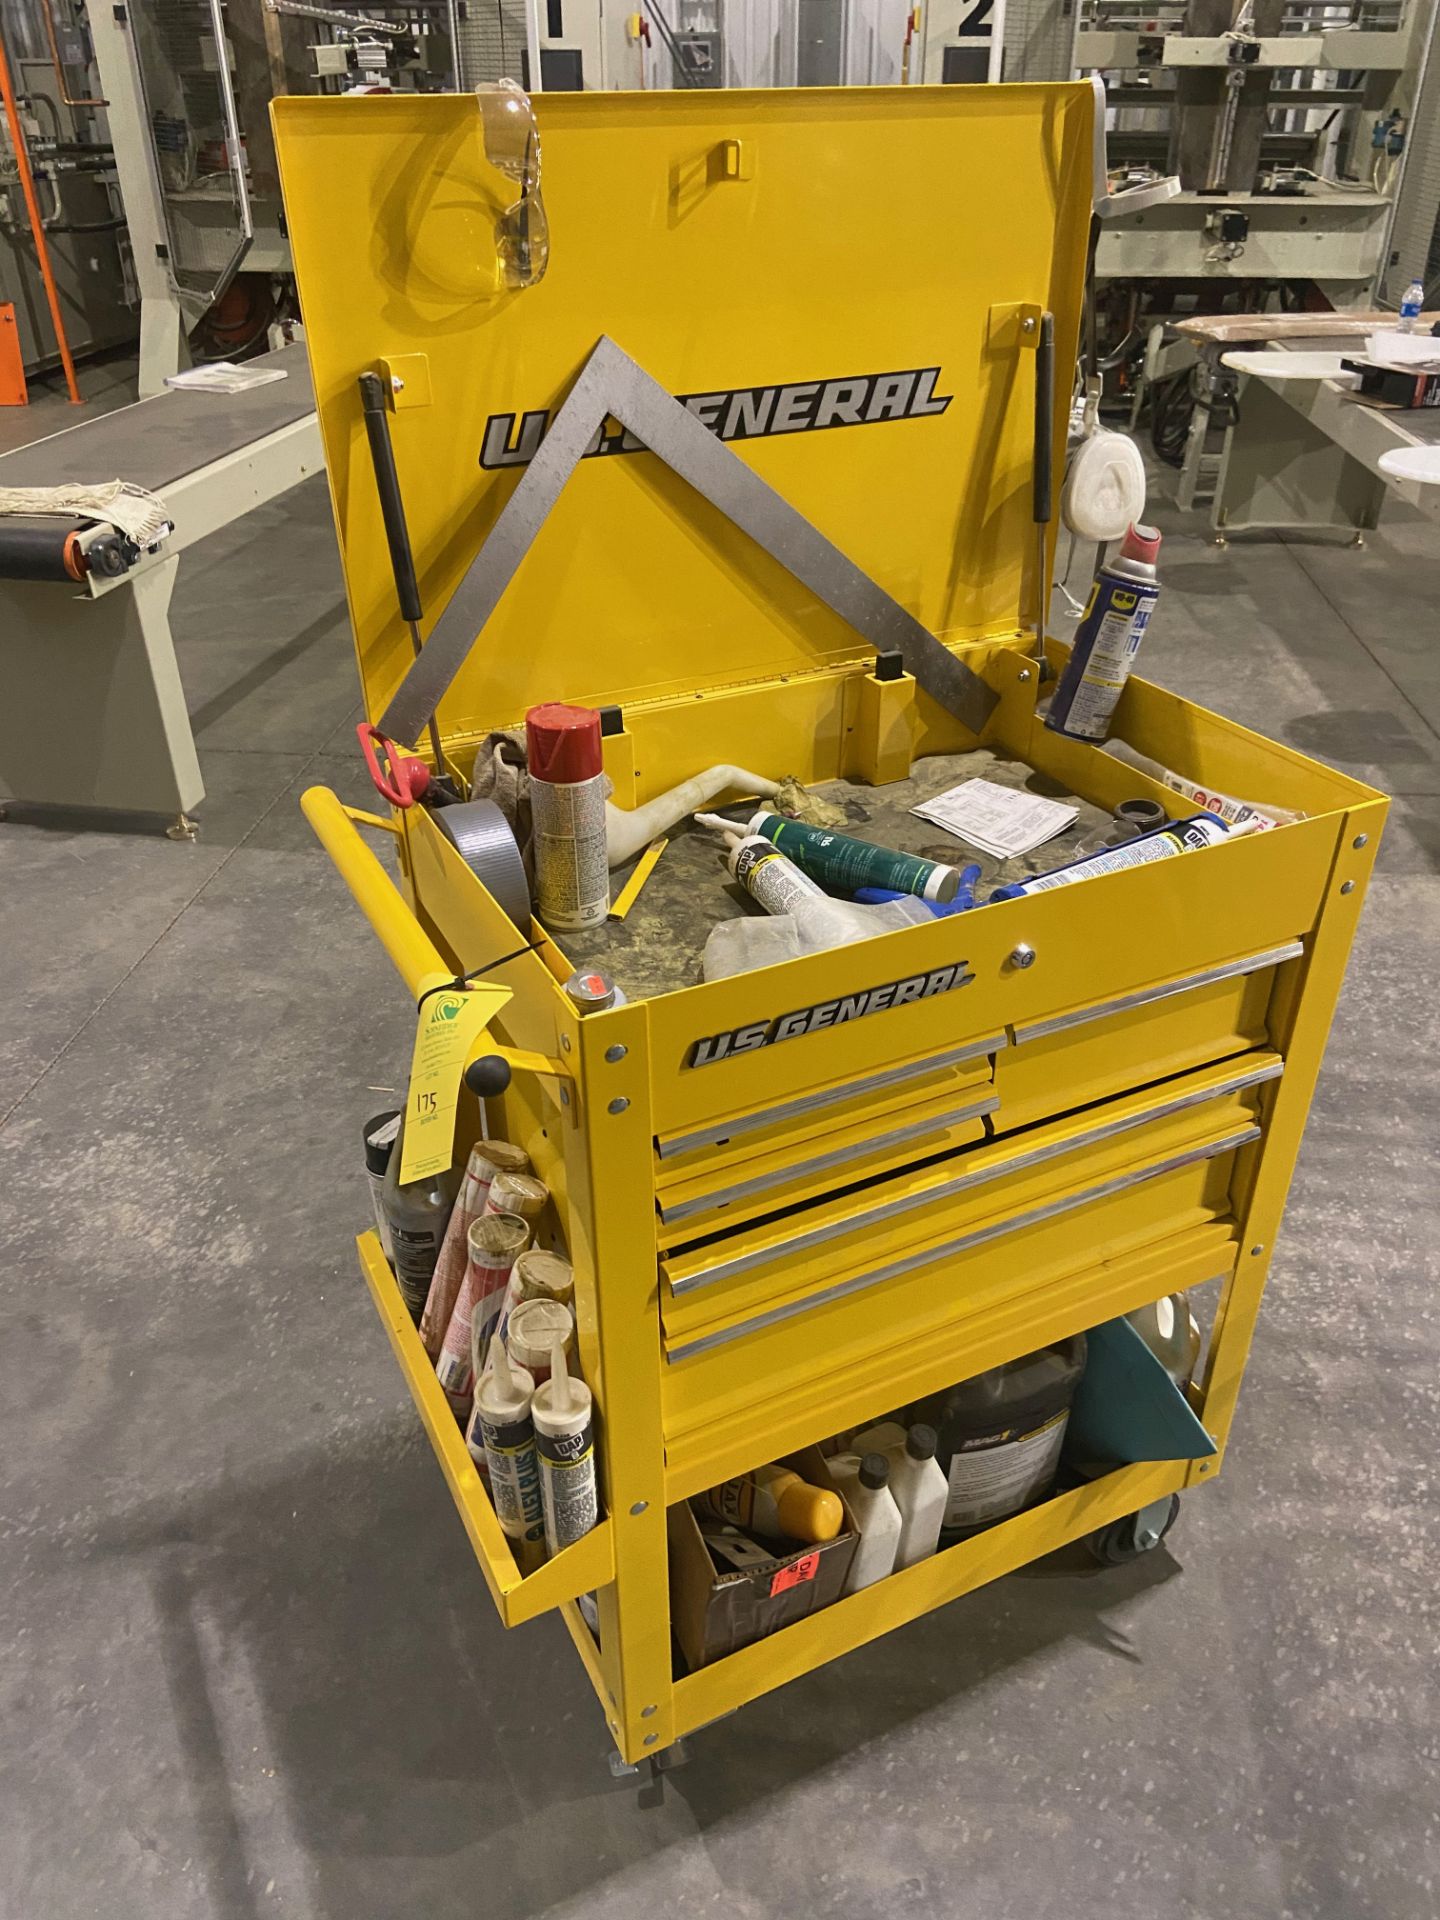 U.S. General Mechanic's Cart on Casters and Contents, 30", 5 Drawer, Rigging Fee: $20